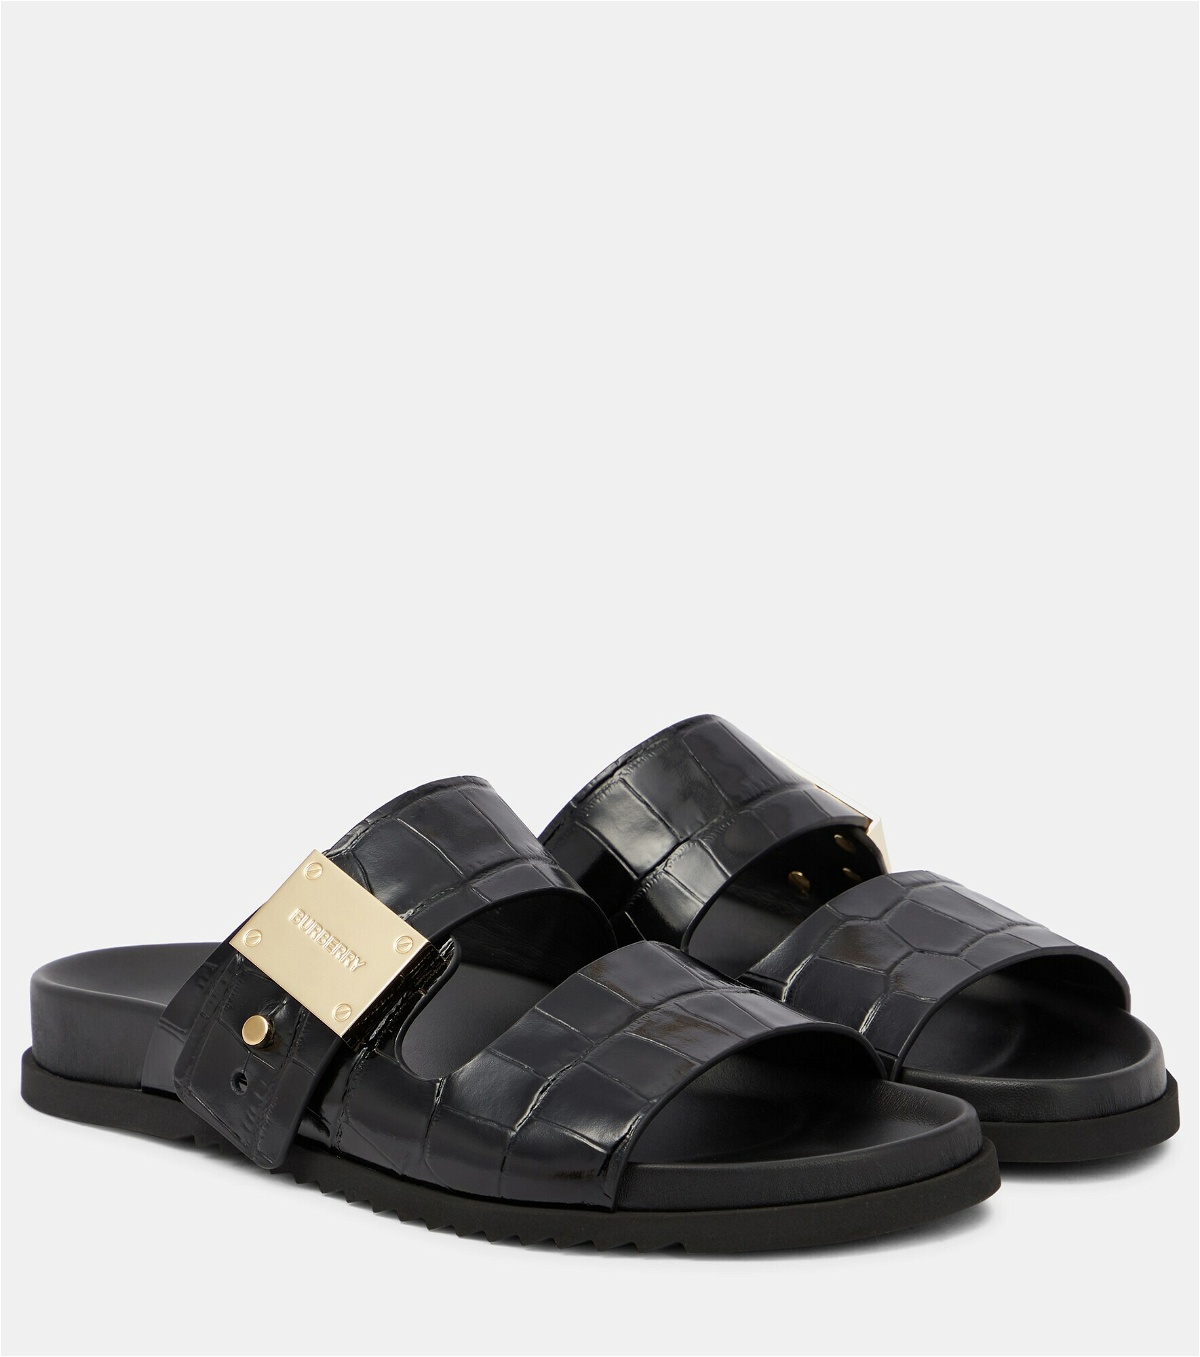 Burberry - Croc-effect leather sandals Burberry